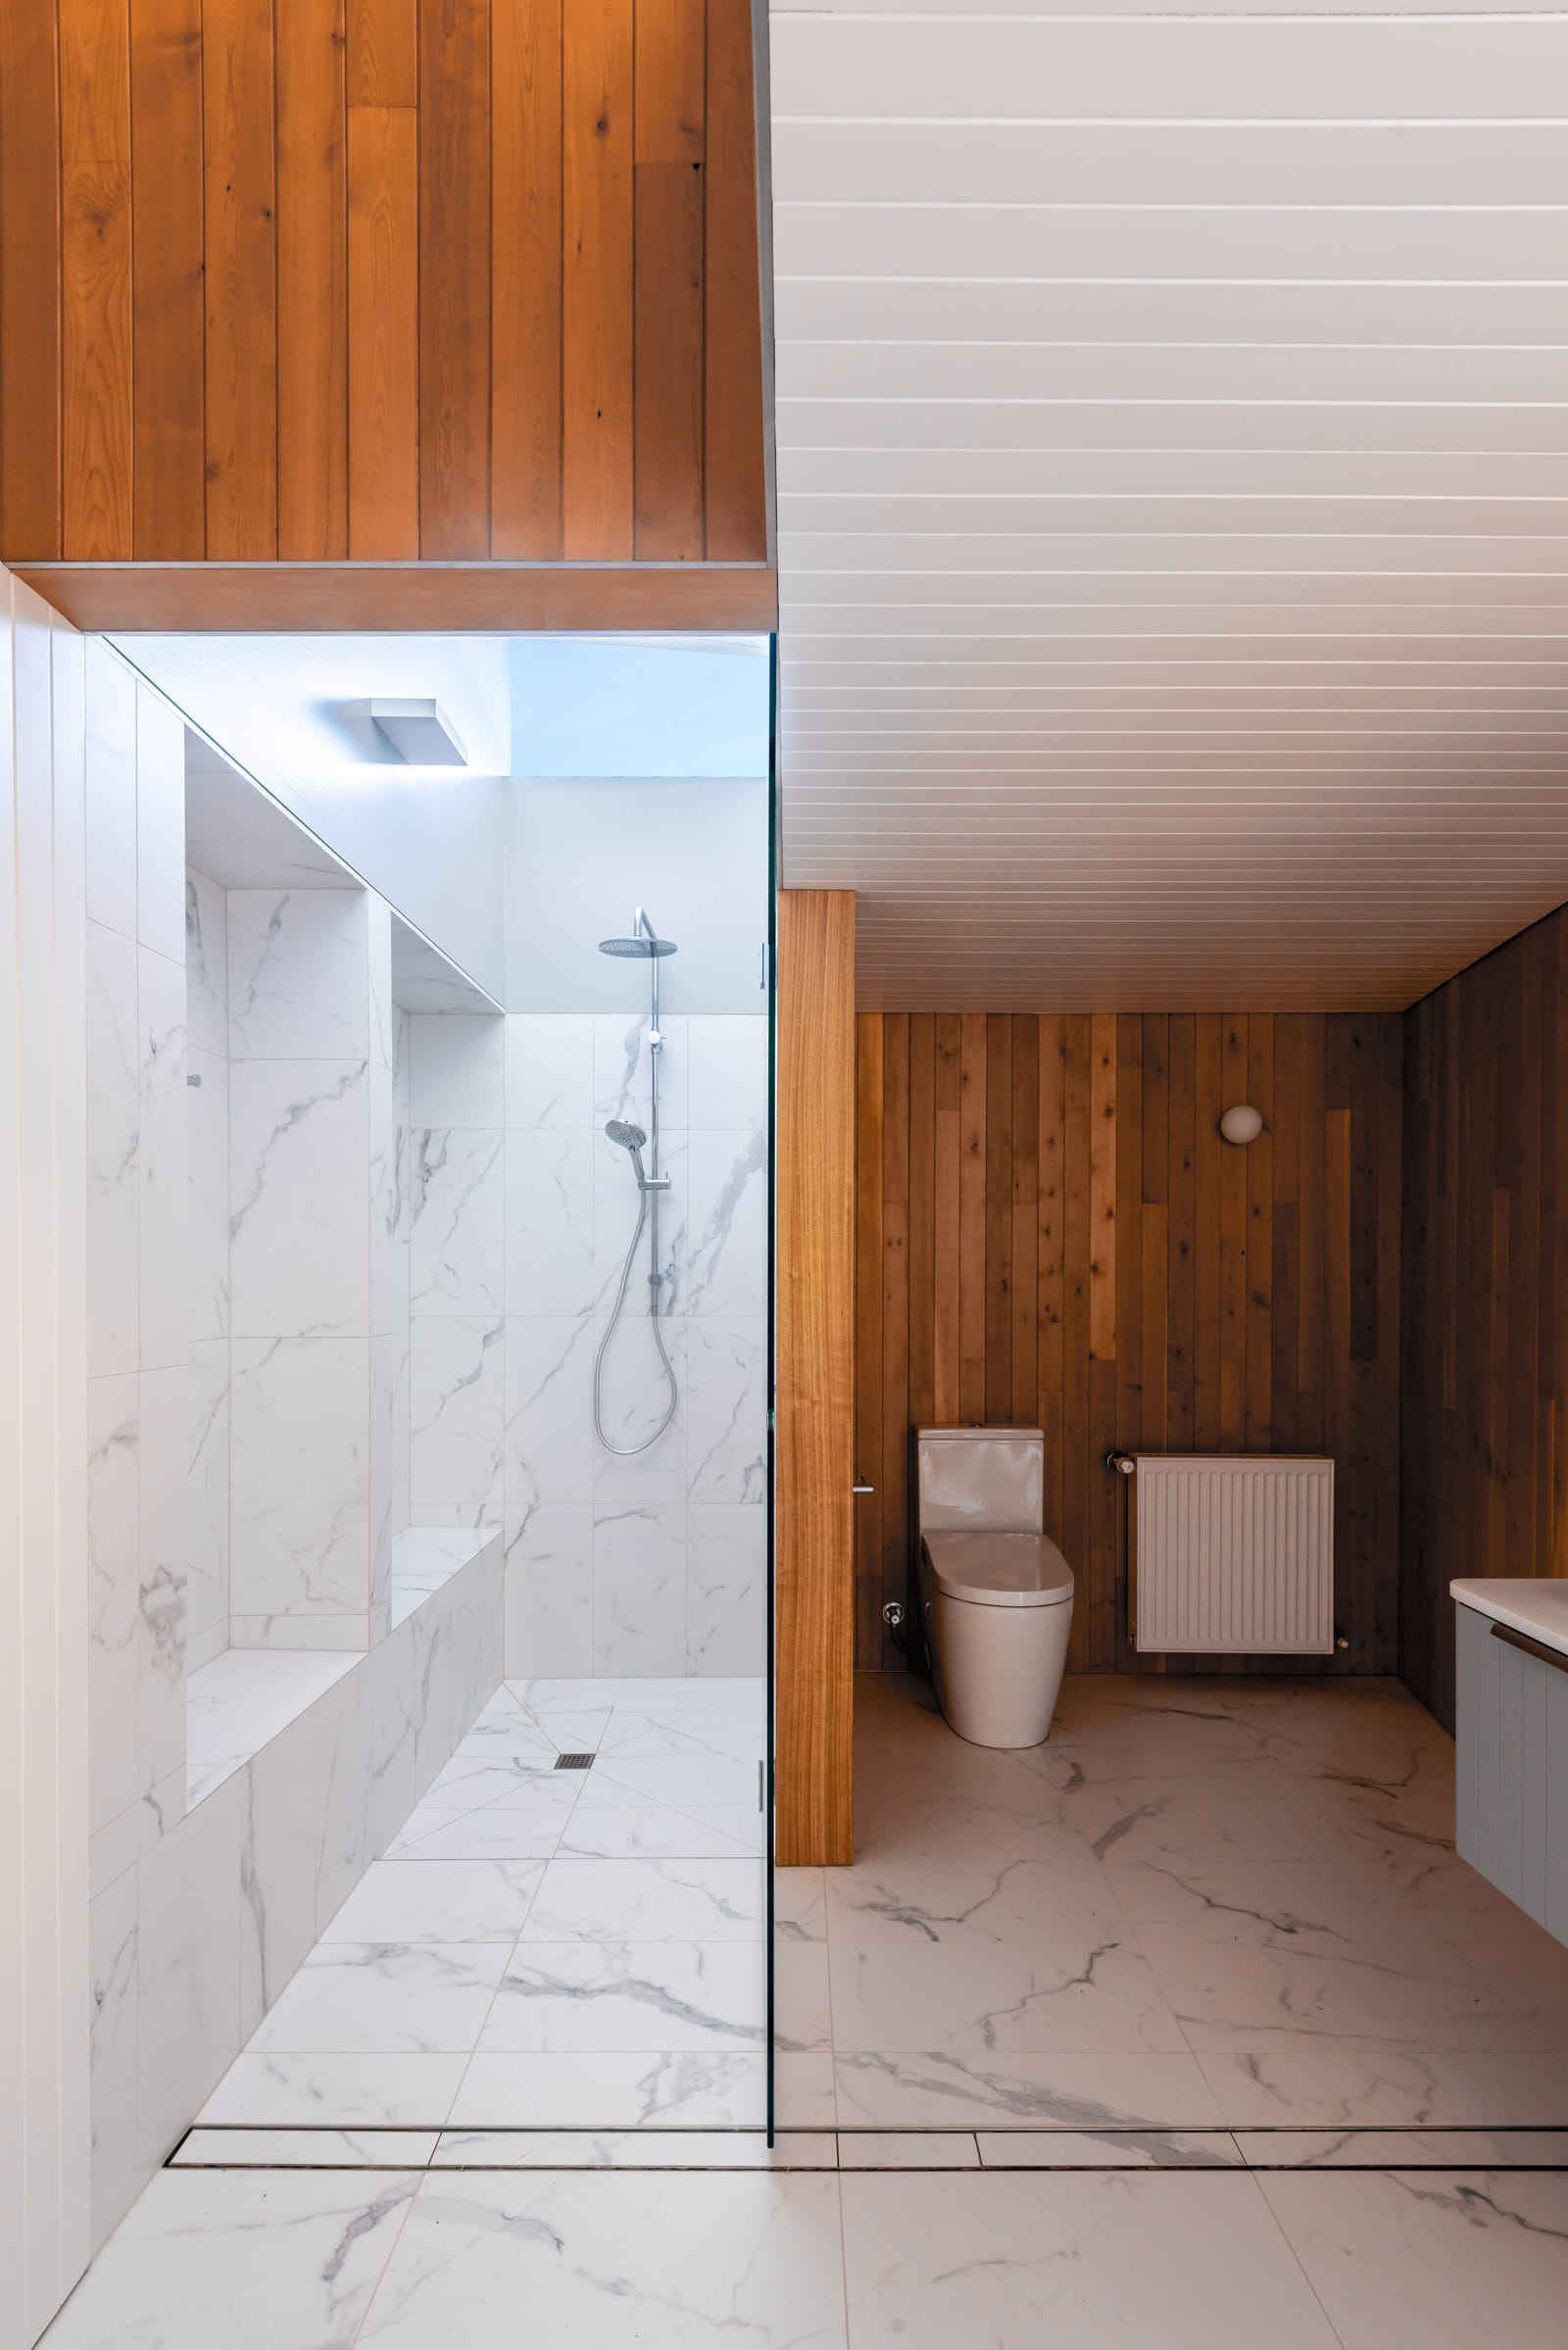 Wattle Bird House by Flett Architecture. Photography by Matt Sansom. Bathroom with marble floors and walls. Timber paneled walls around toilet and on ceiling. Ceiling light in shower. 